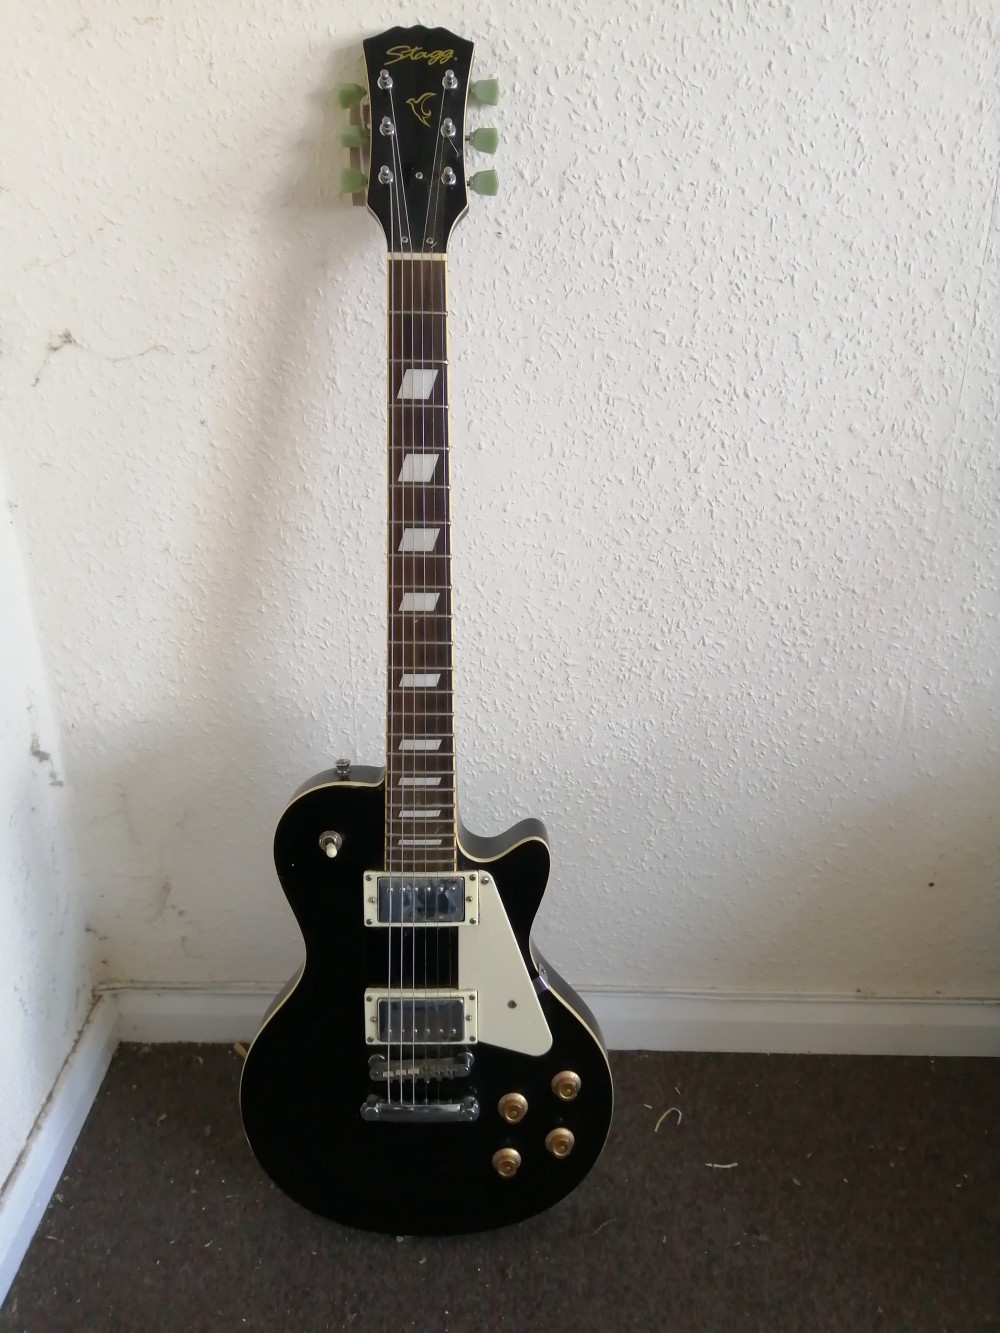 A Stagg Les Paul style electric guitar